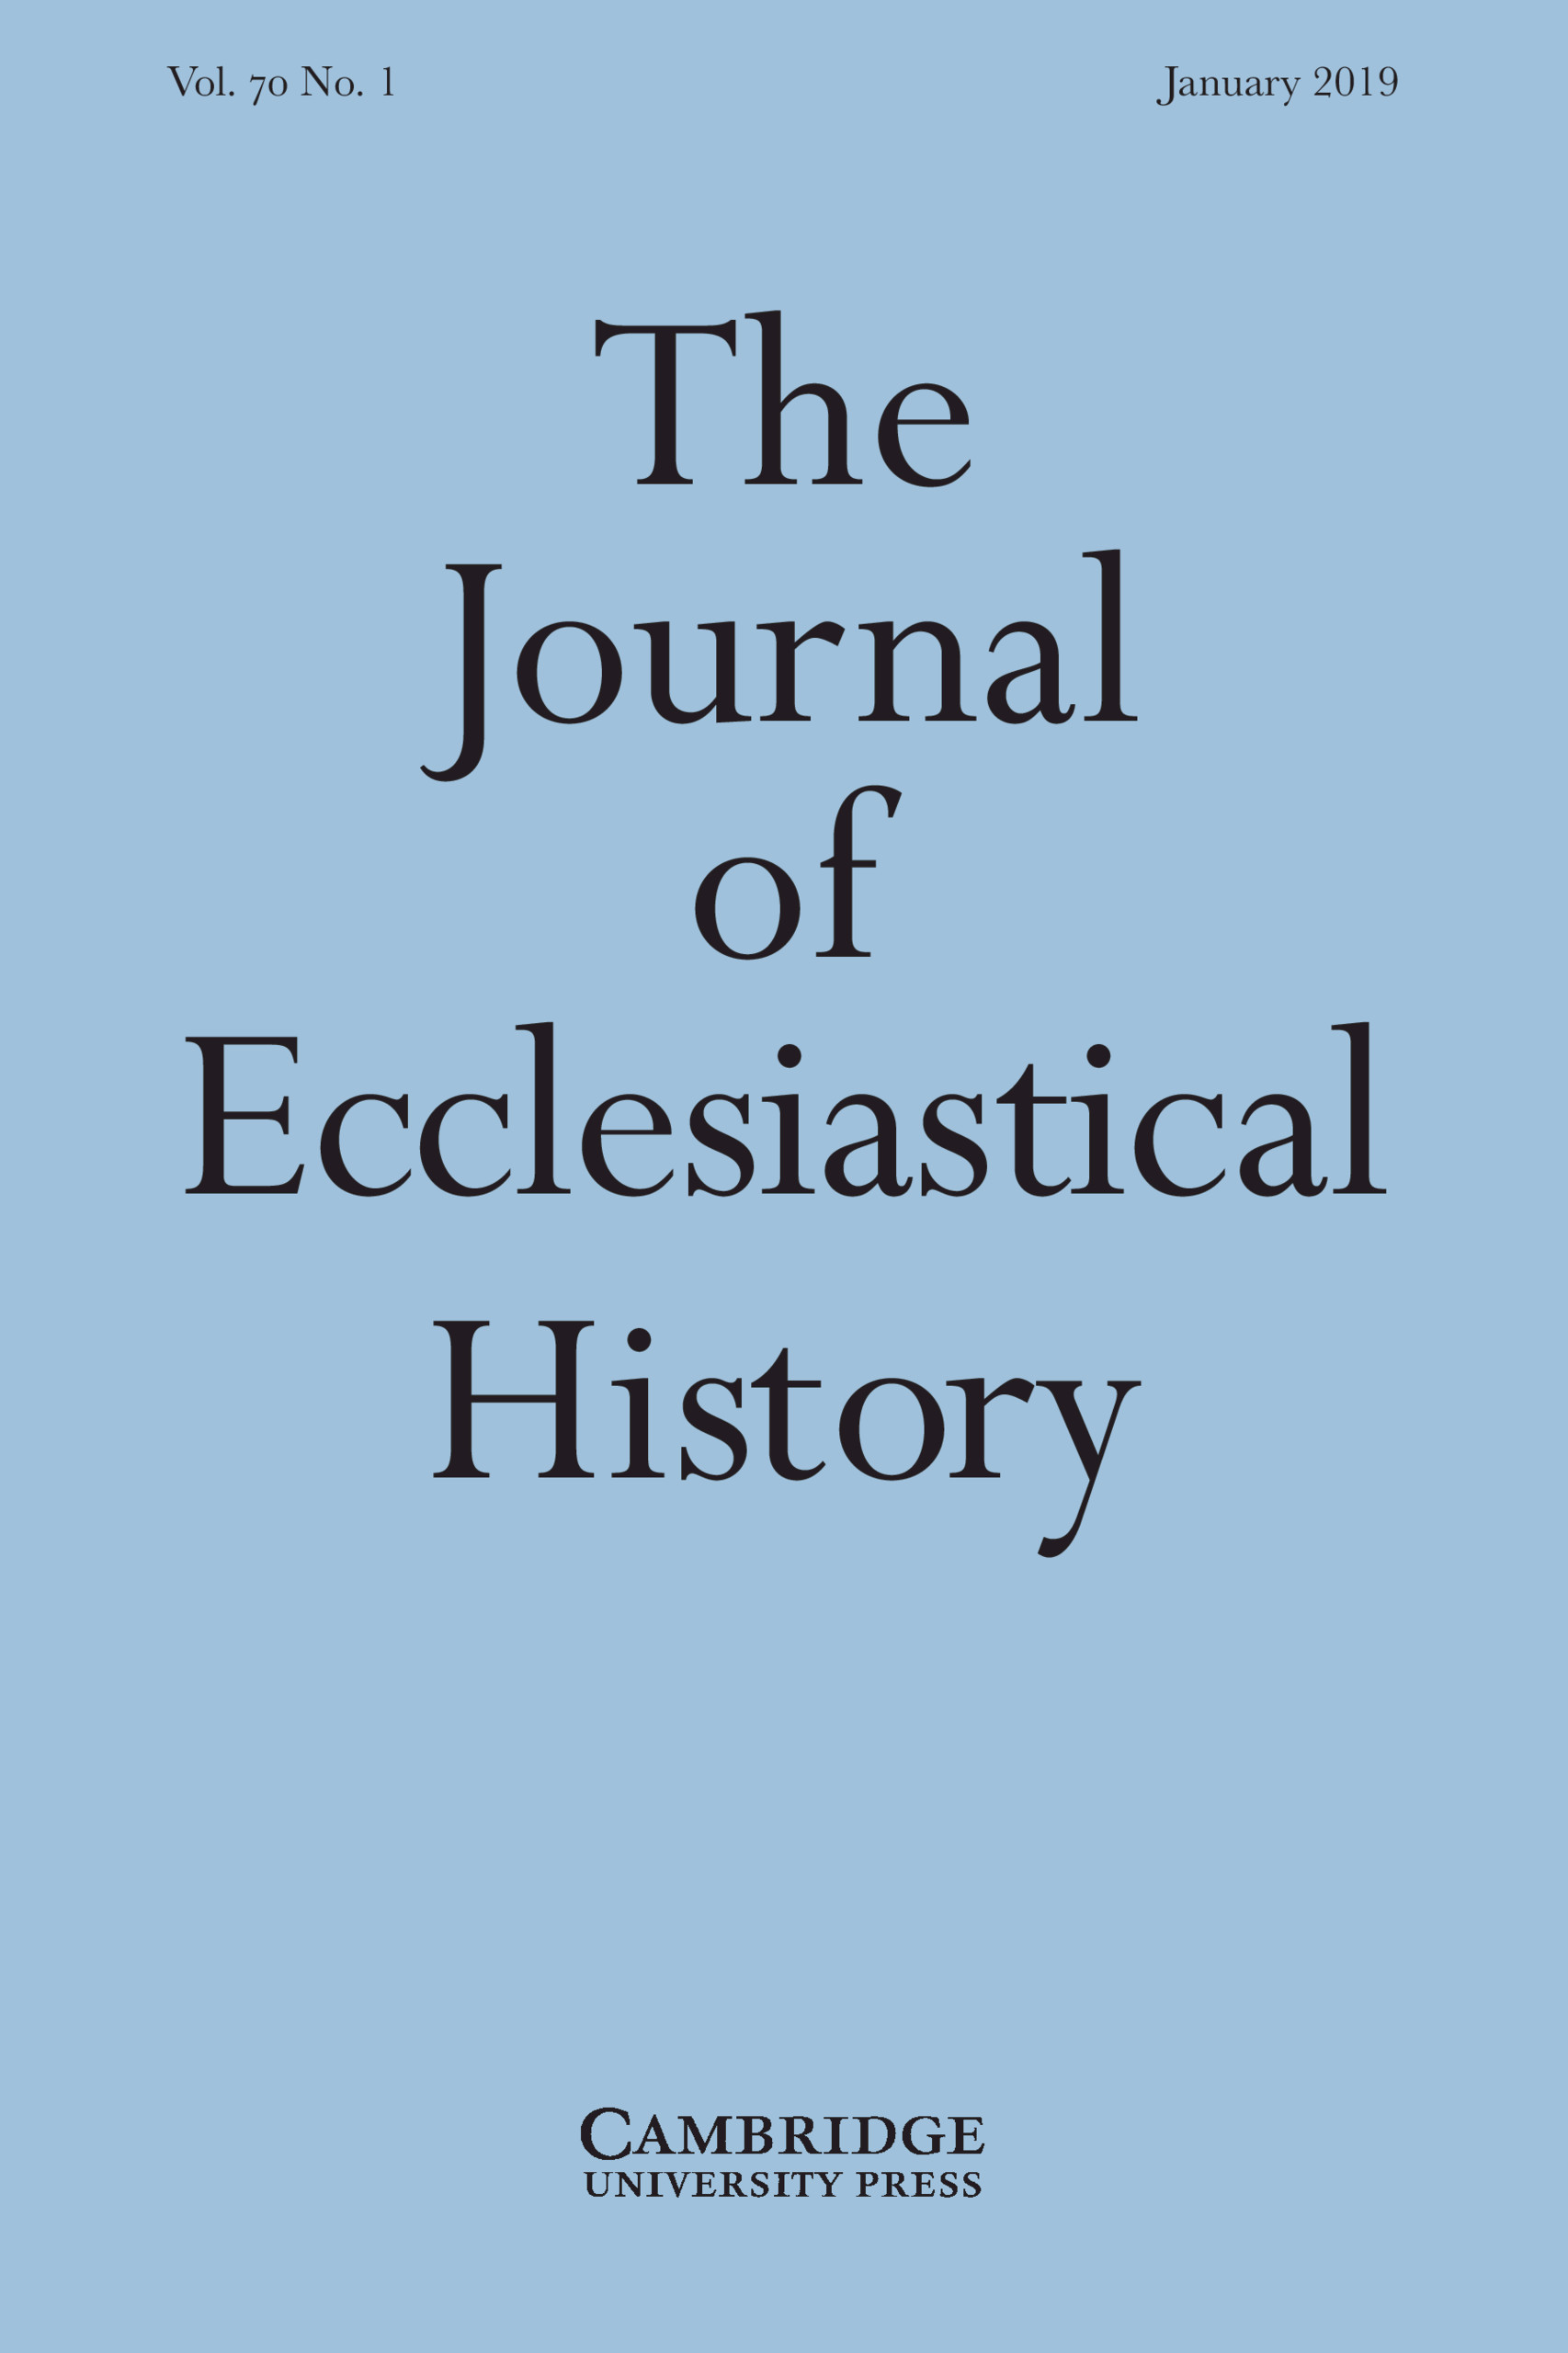 The Journal of Ecclesiastical History: Volume 70 - Issue 1 | Cambridge Core